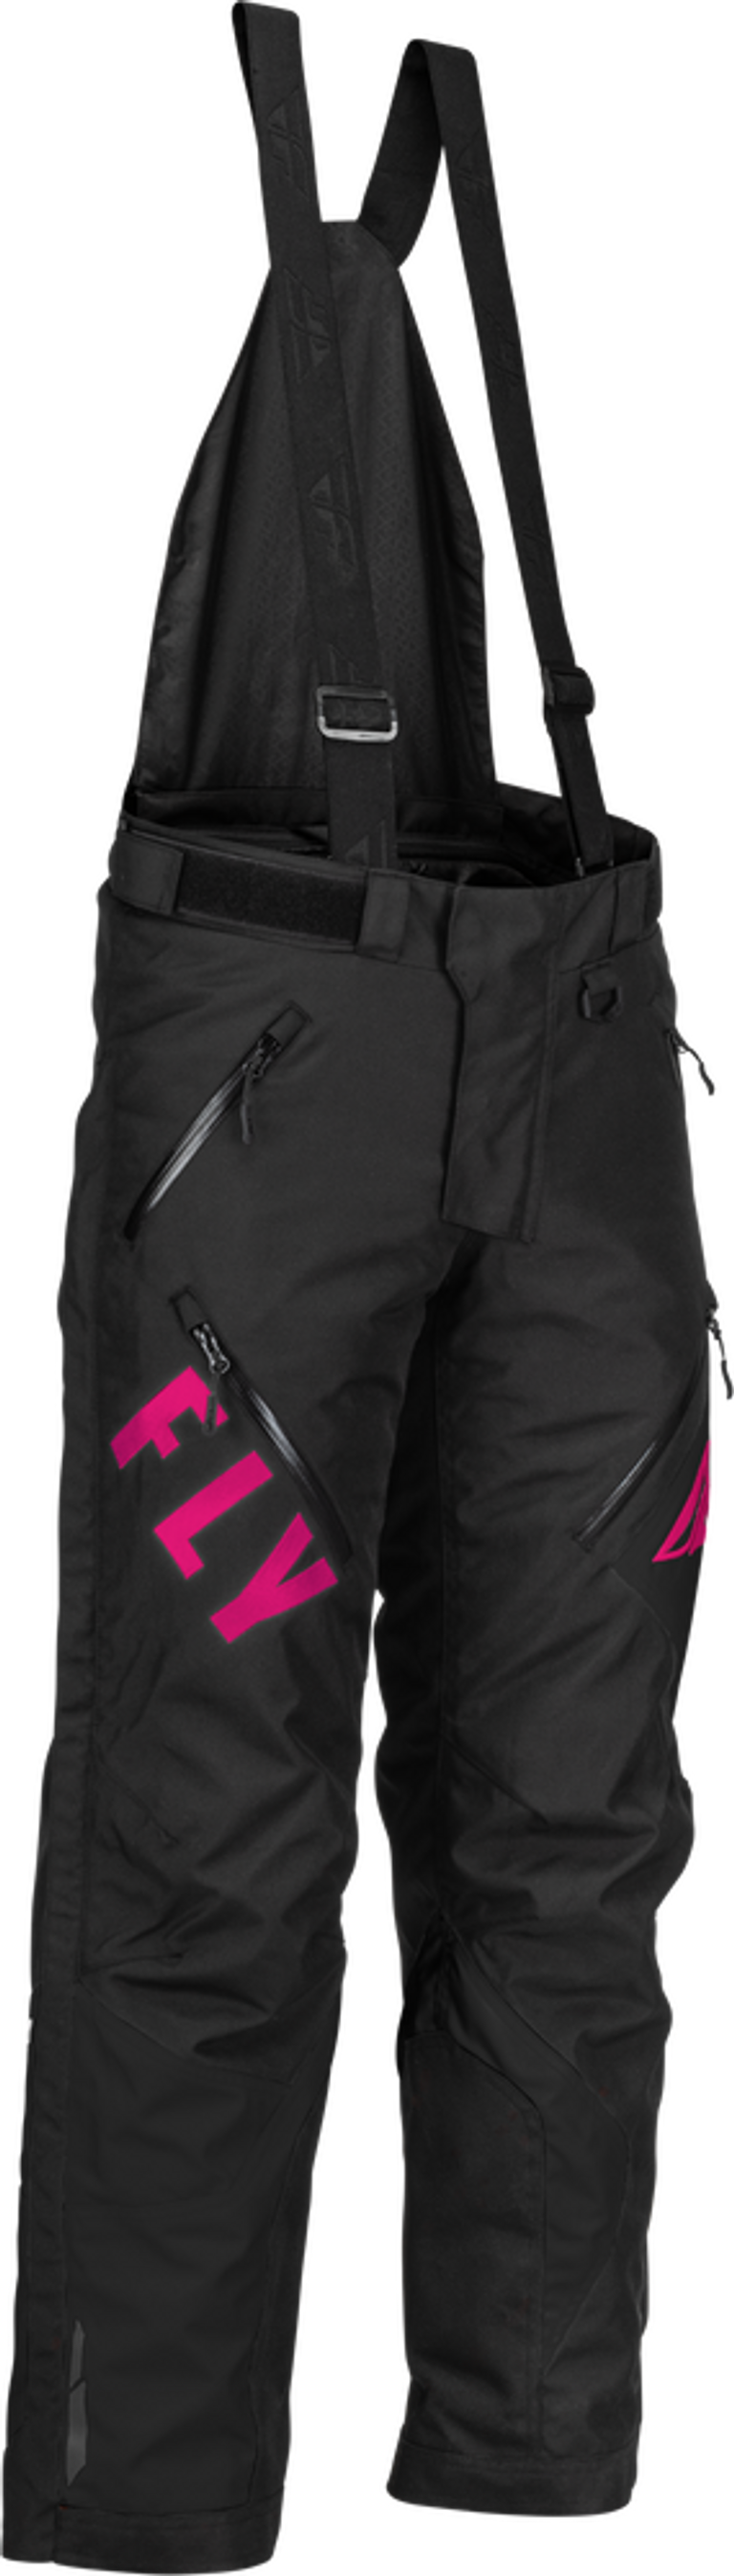 FLY Racing Snow Gear - Women's | Free Shipping Over $99